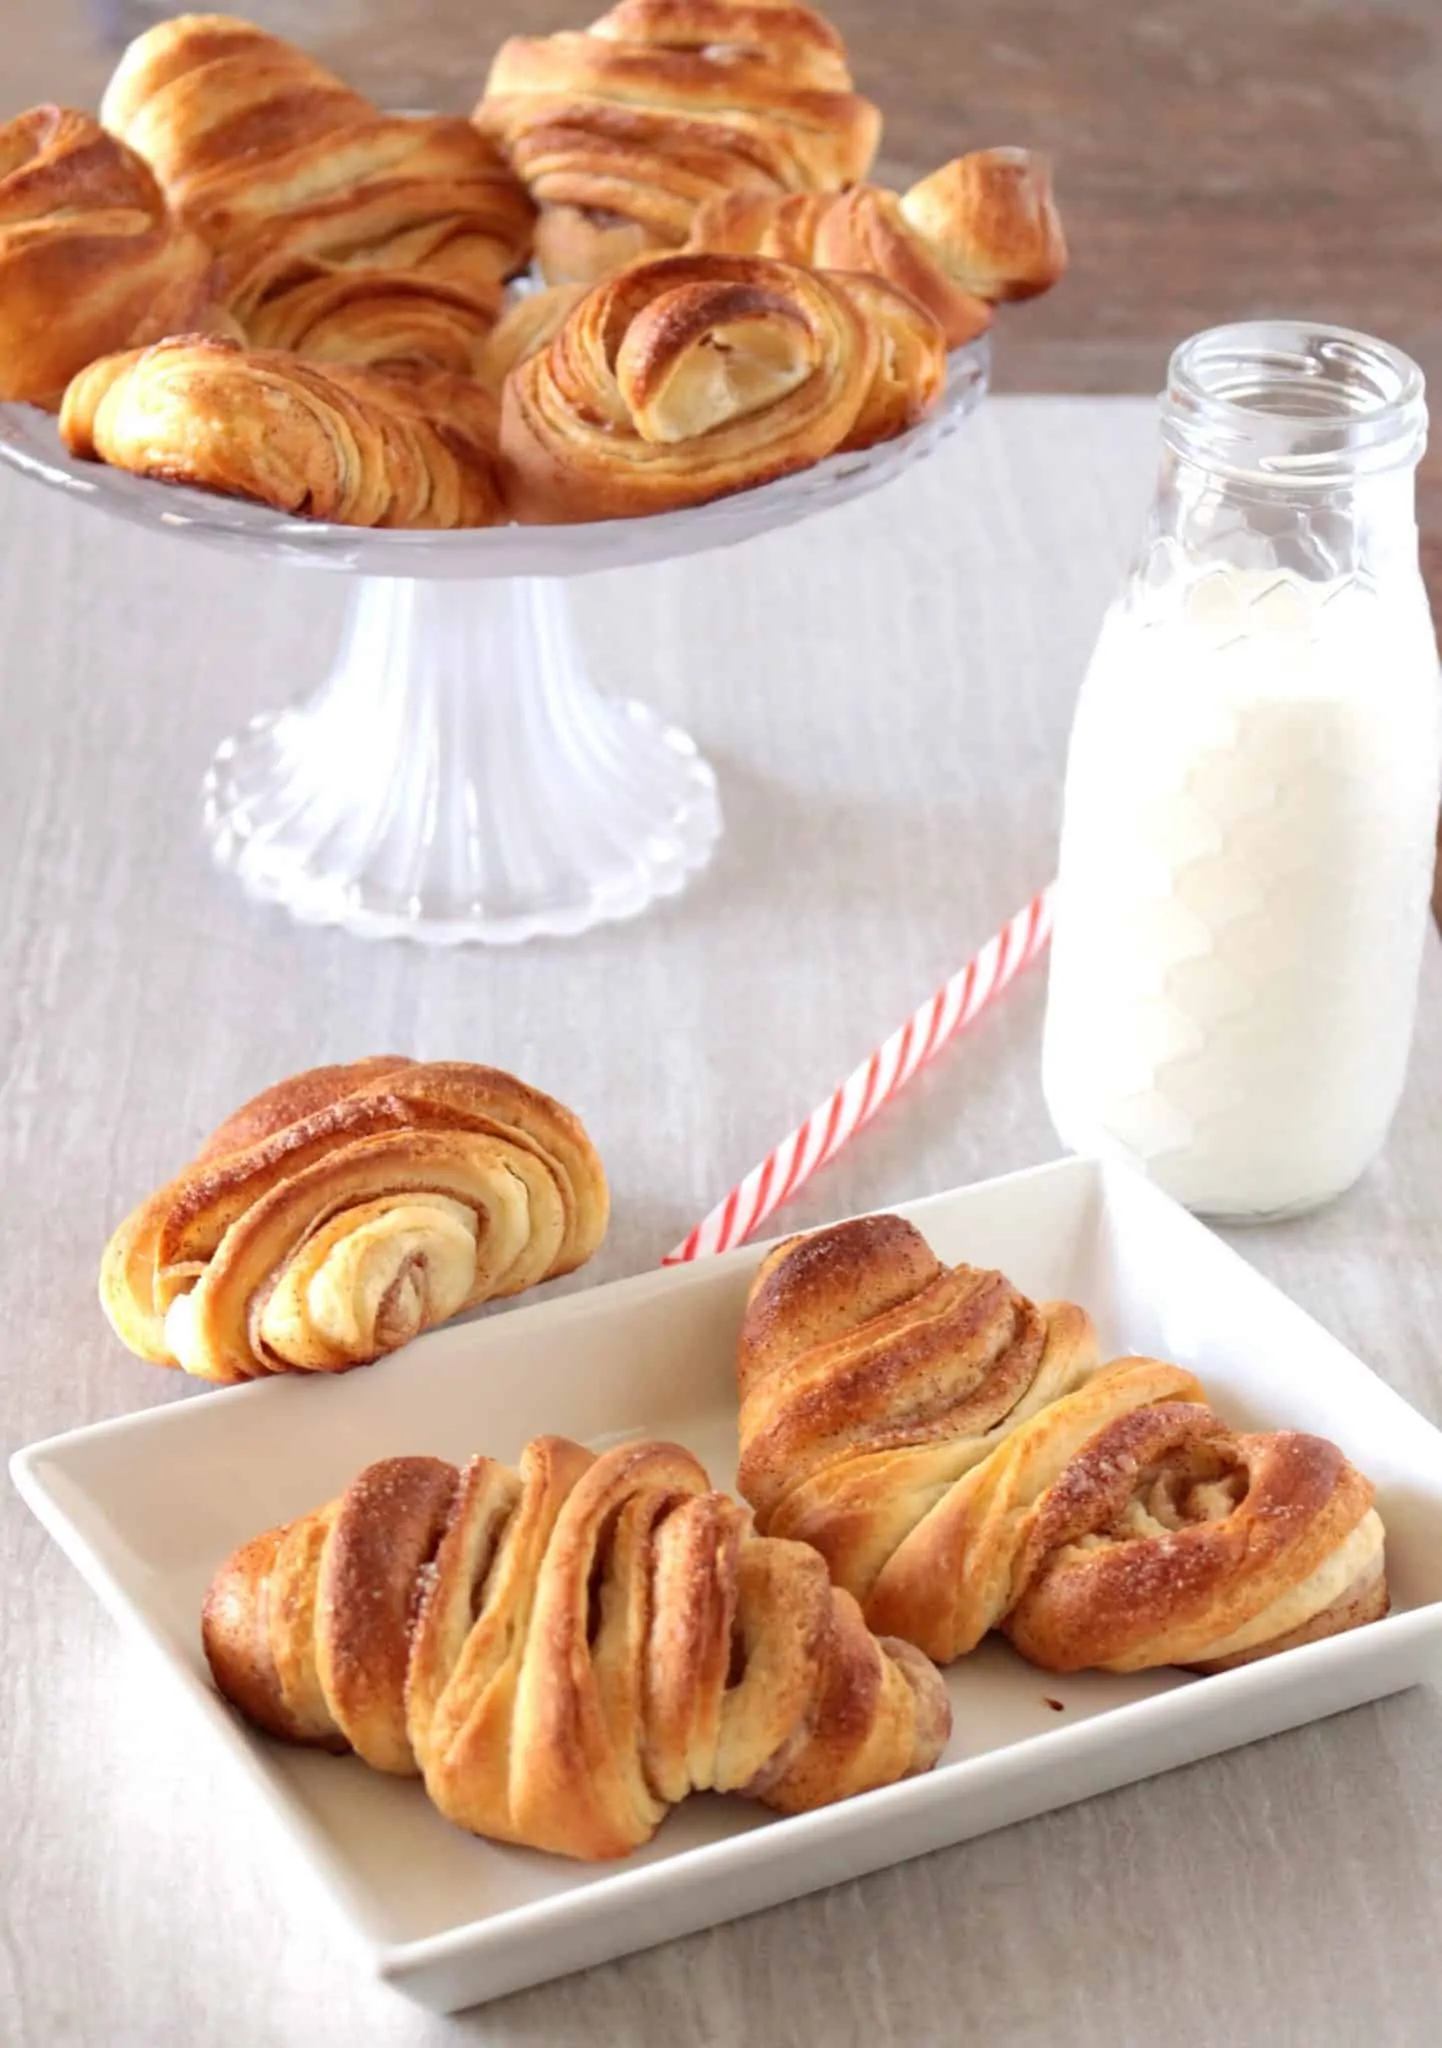  German Croissant served in a bowl with milk